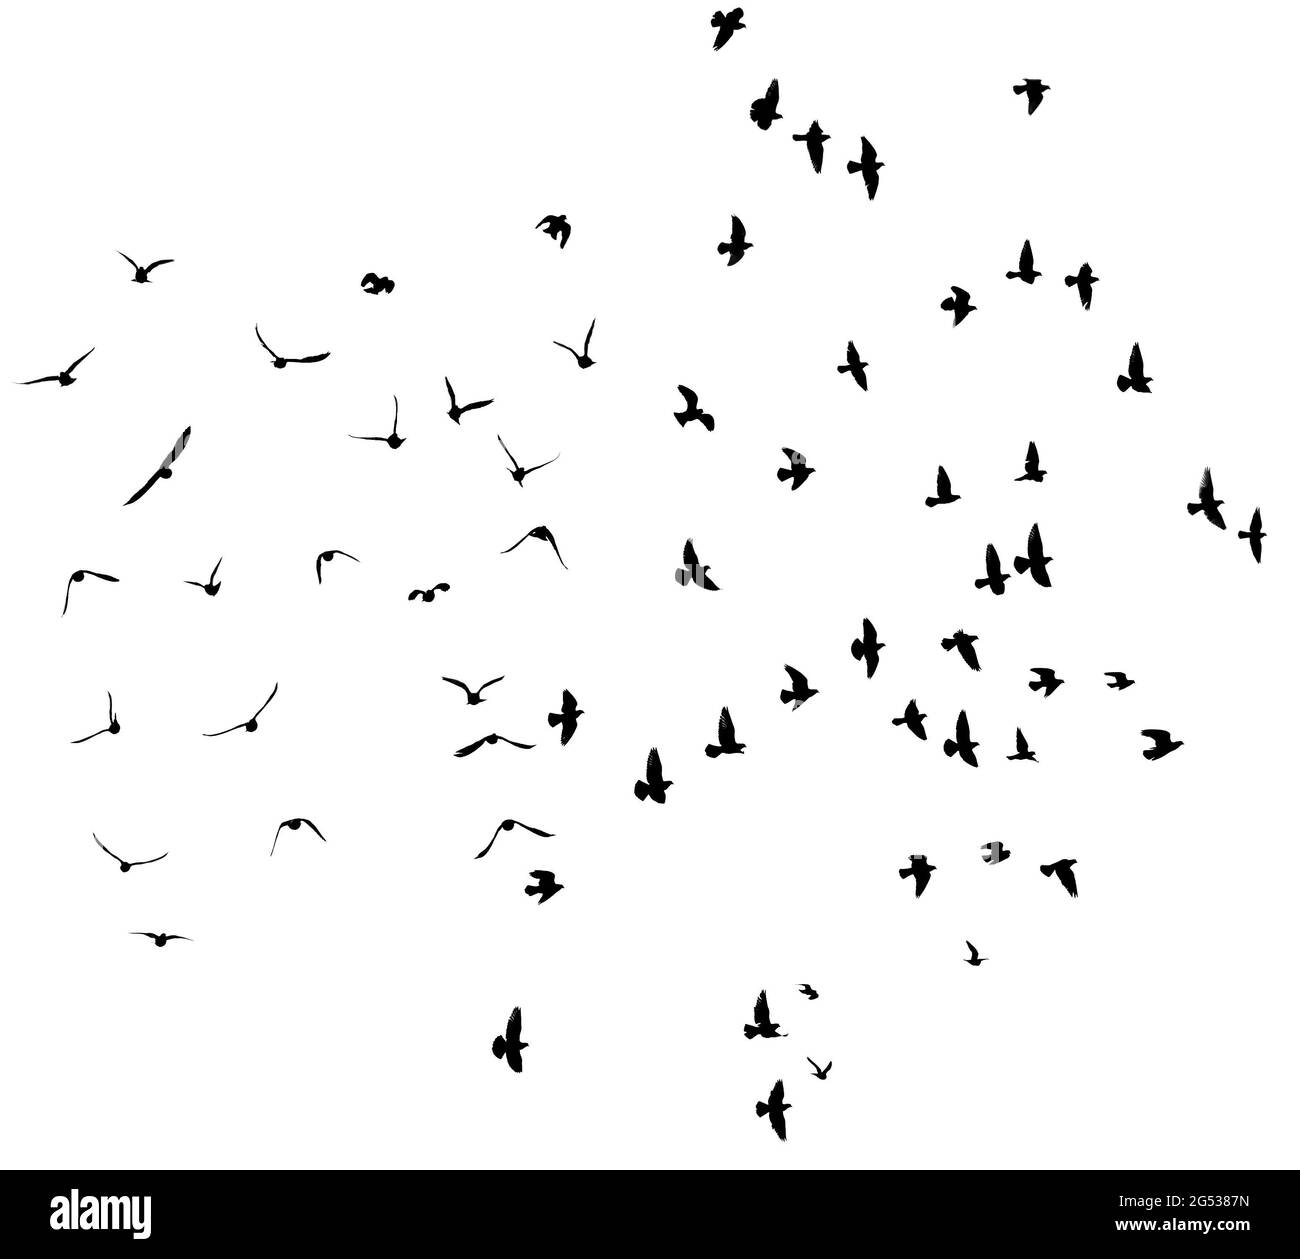 Silhouette of flying pigeons isolated on white. Stock Photo